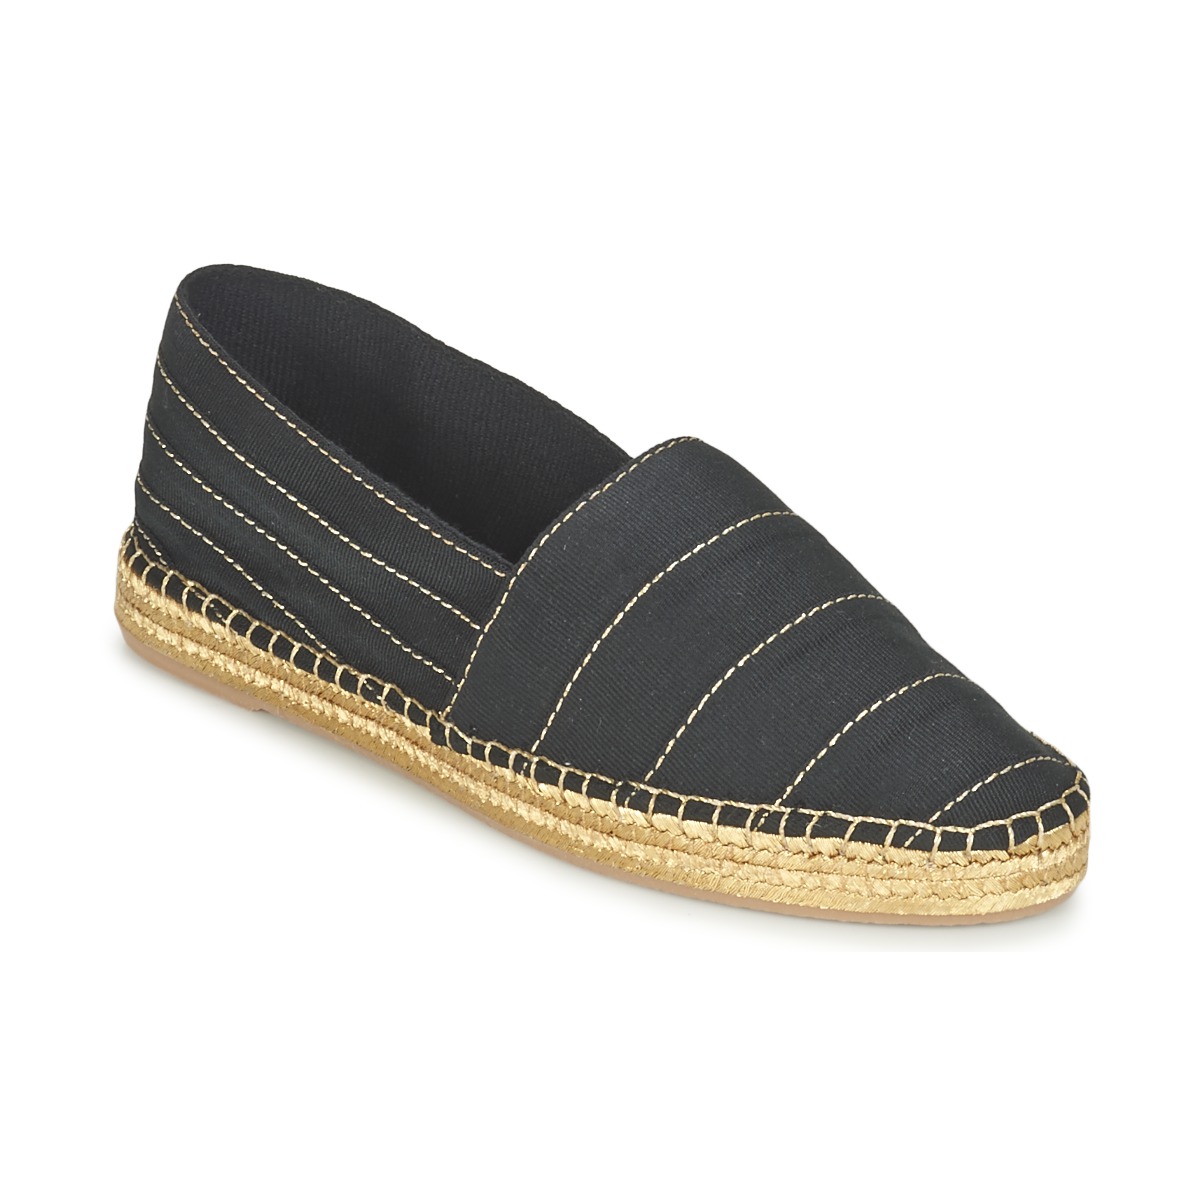 marc jacobs  sienna  women's espadrilles / casual shoes in black